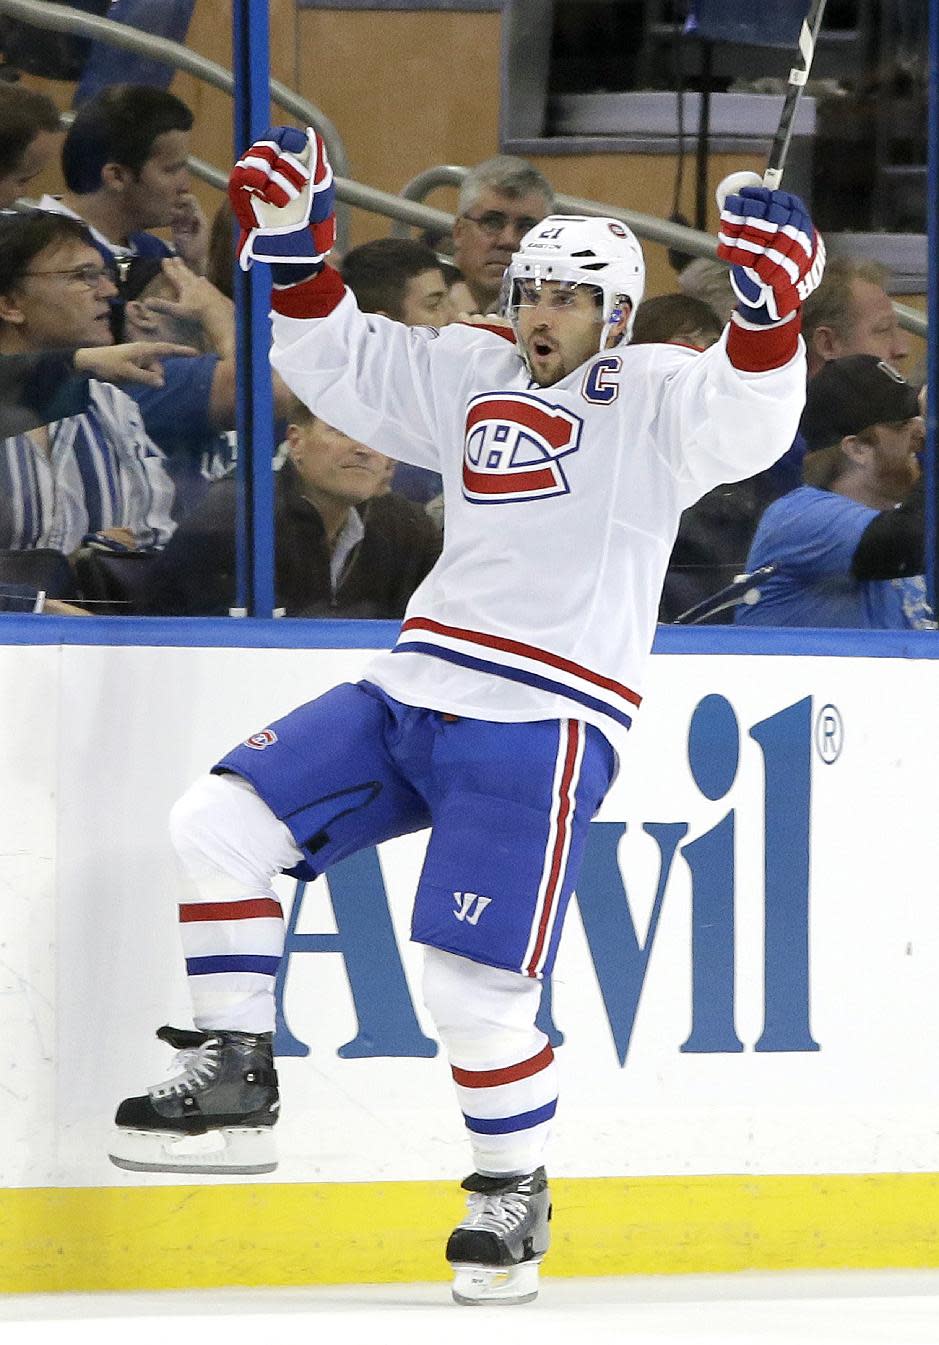 Montreal Canadiens right wing Brian Gionta celebrates after his short-handed goal against the Tampa Bay Lightning during the second period of Game 1 of a first-round NHL hockey playoff series on Wednesday, April 16, 2014, in Tampa, Fla. (AP Photo/Chris O'Meara)